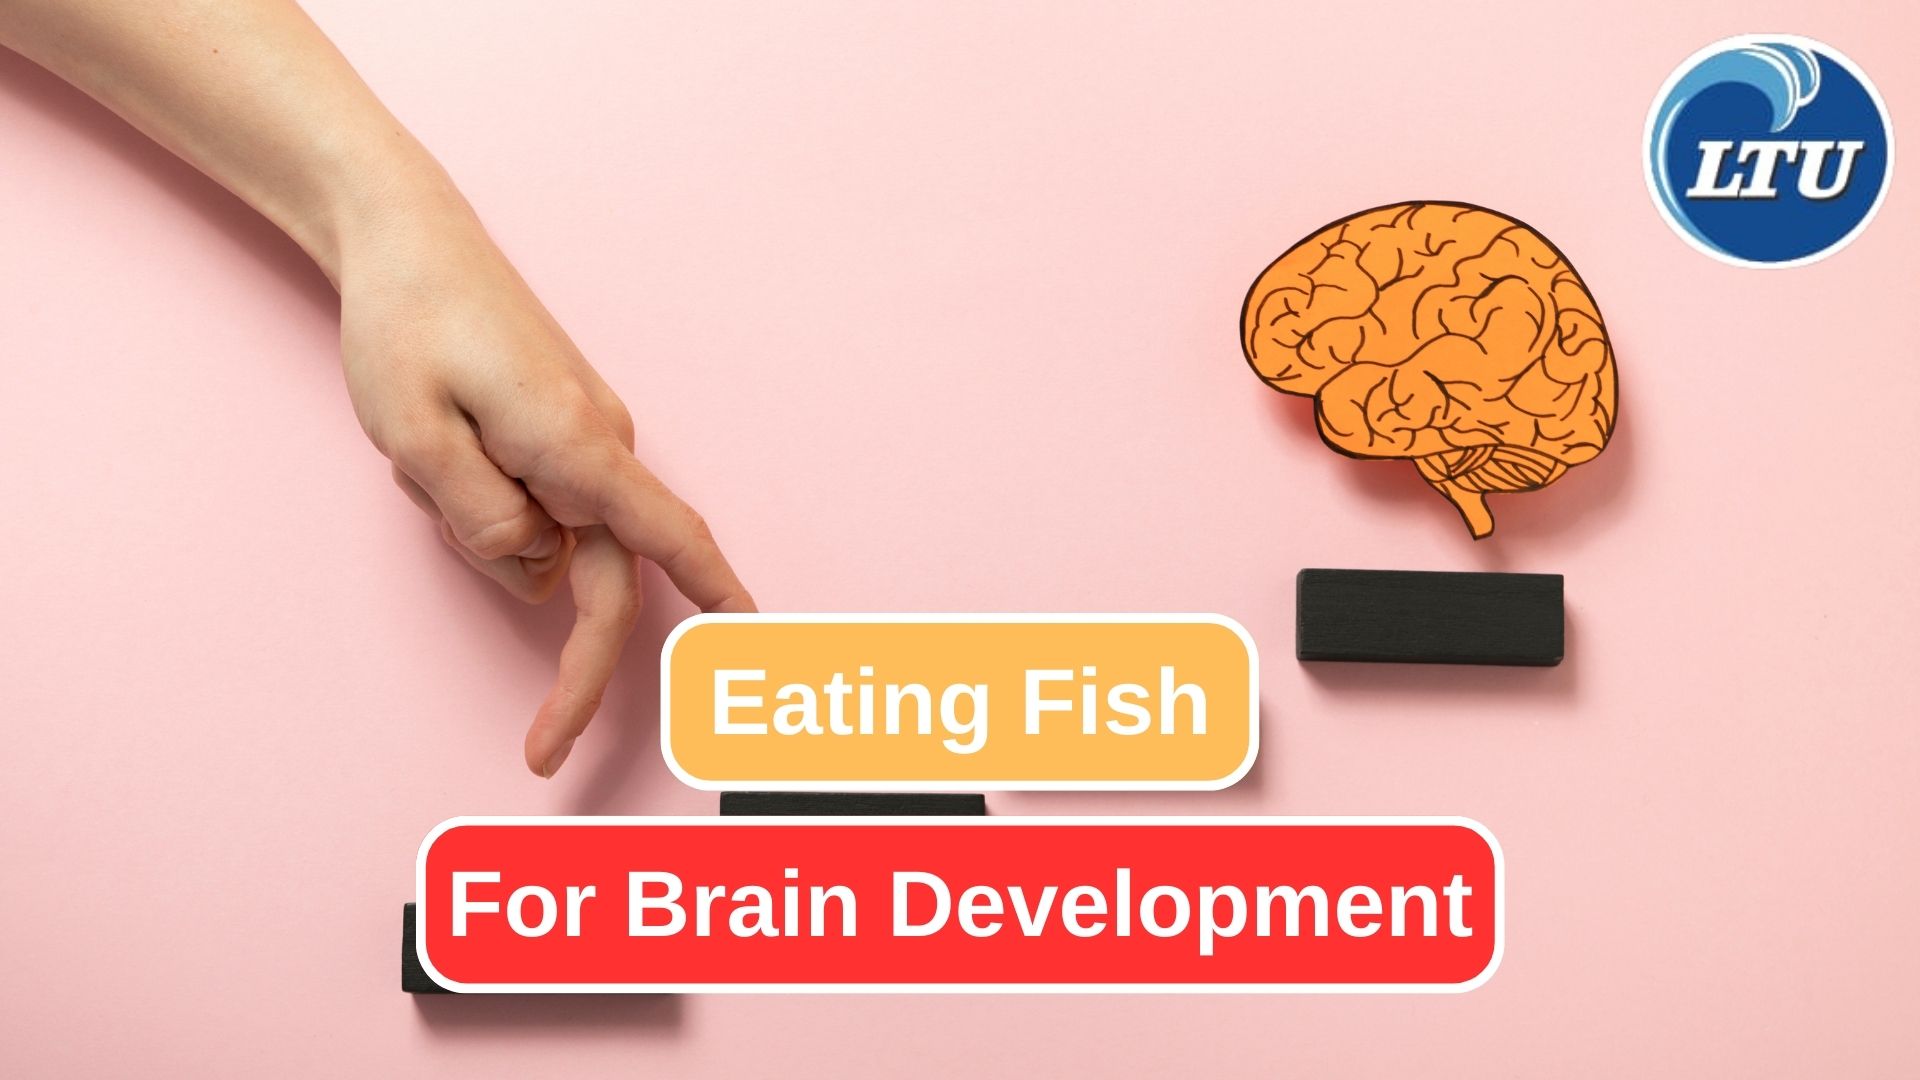 The 8 Benefits of Eating Fish for Brain Development